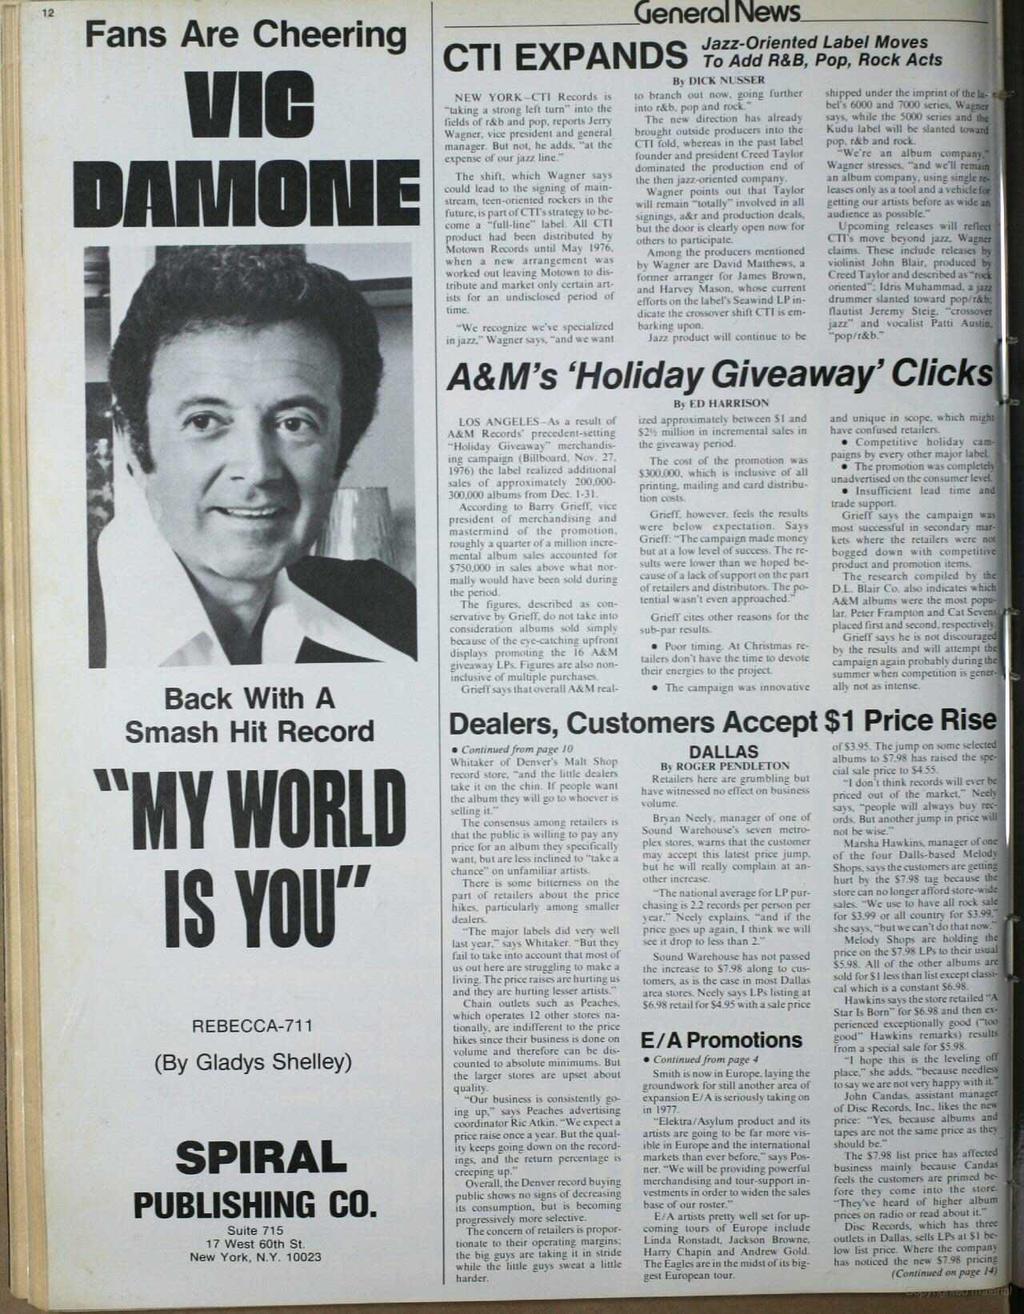 Fans Are Cheering v'o DAMONE Back With A Smash Hit Record "MY WORLD IS YOU" REBECCA -7 (By Gladys Shelley) SPIRAL PUBLISHING CO. Suite 75 7 West 60th St. New York, N.Y. 0023 venerol News_ CTI EXPANDS Jazz -Oriented Label Moves By UIt k \ t sser NEW YORK -CTI Records as tai branch out it.